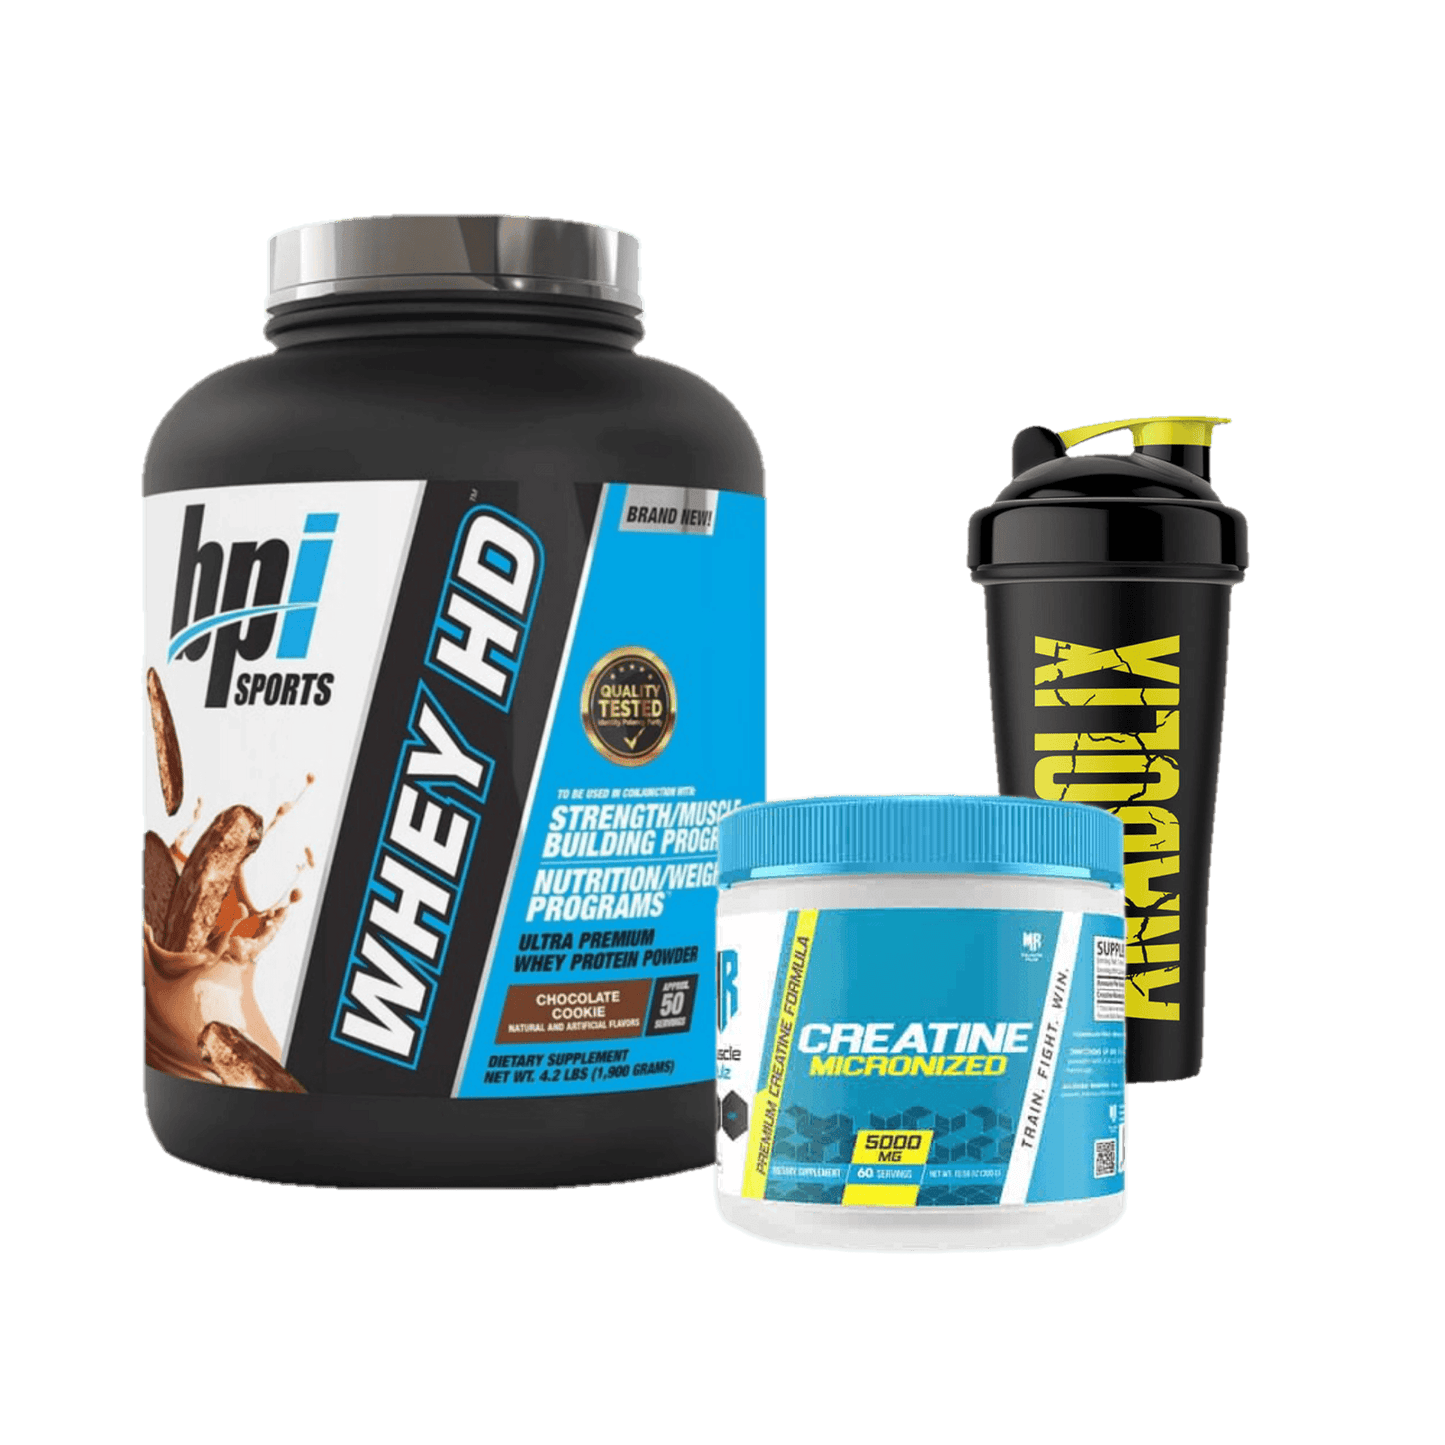 Whey BPI + Creatine 60 Servings+ Shaker - The Supplements Factory